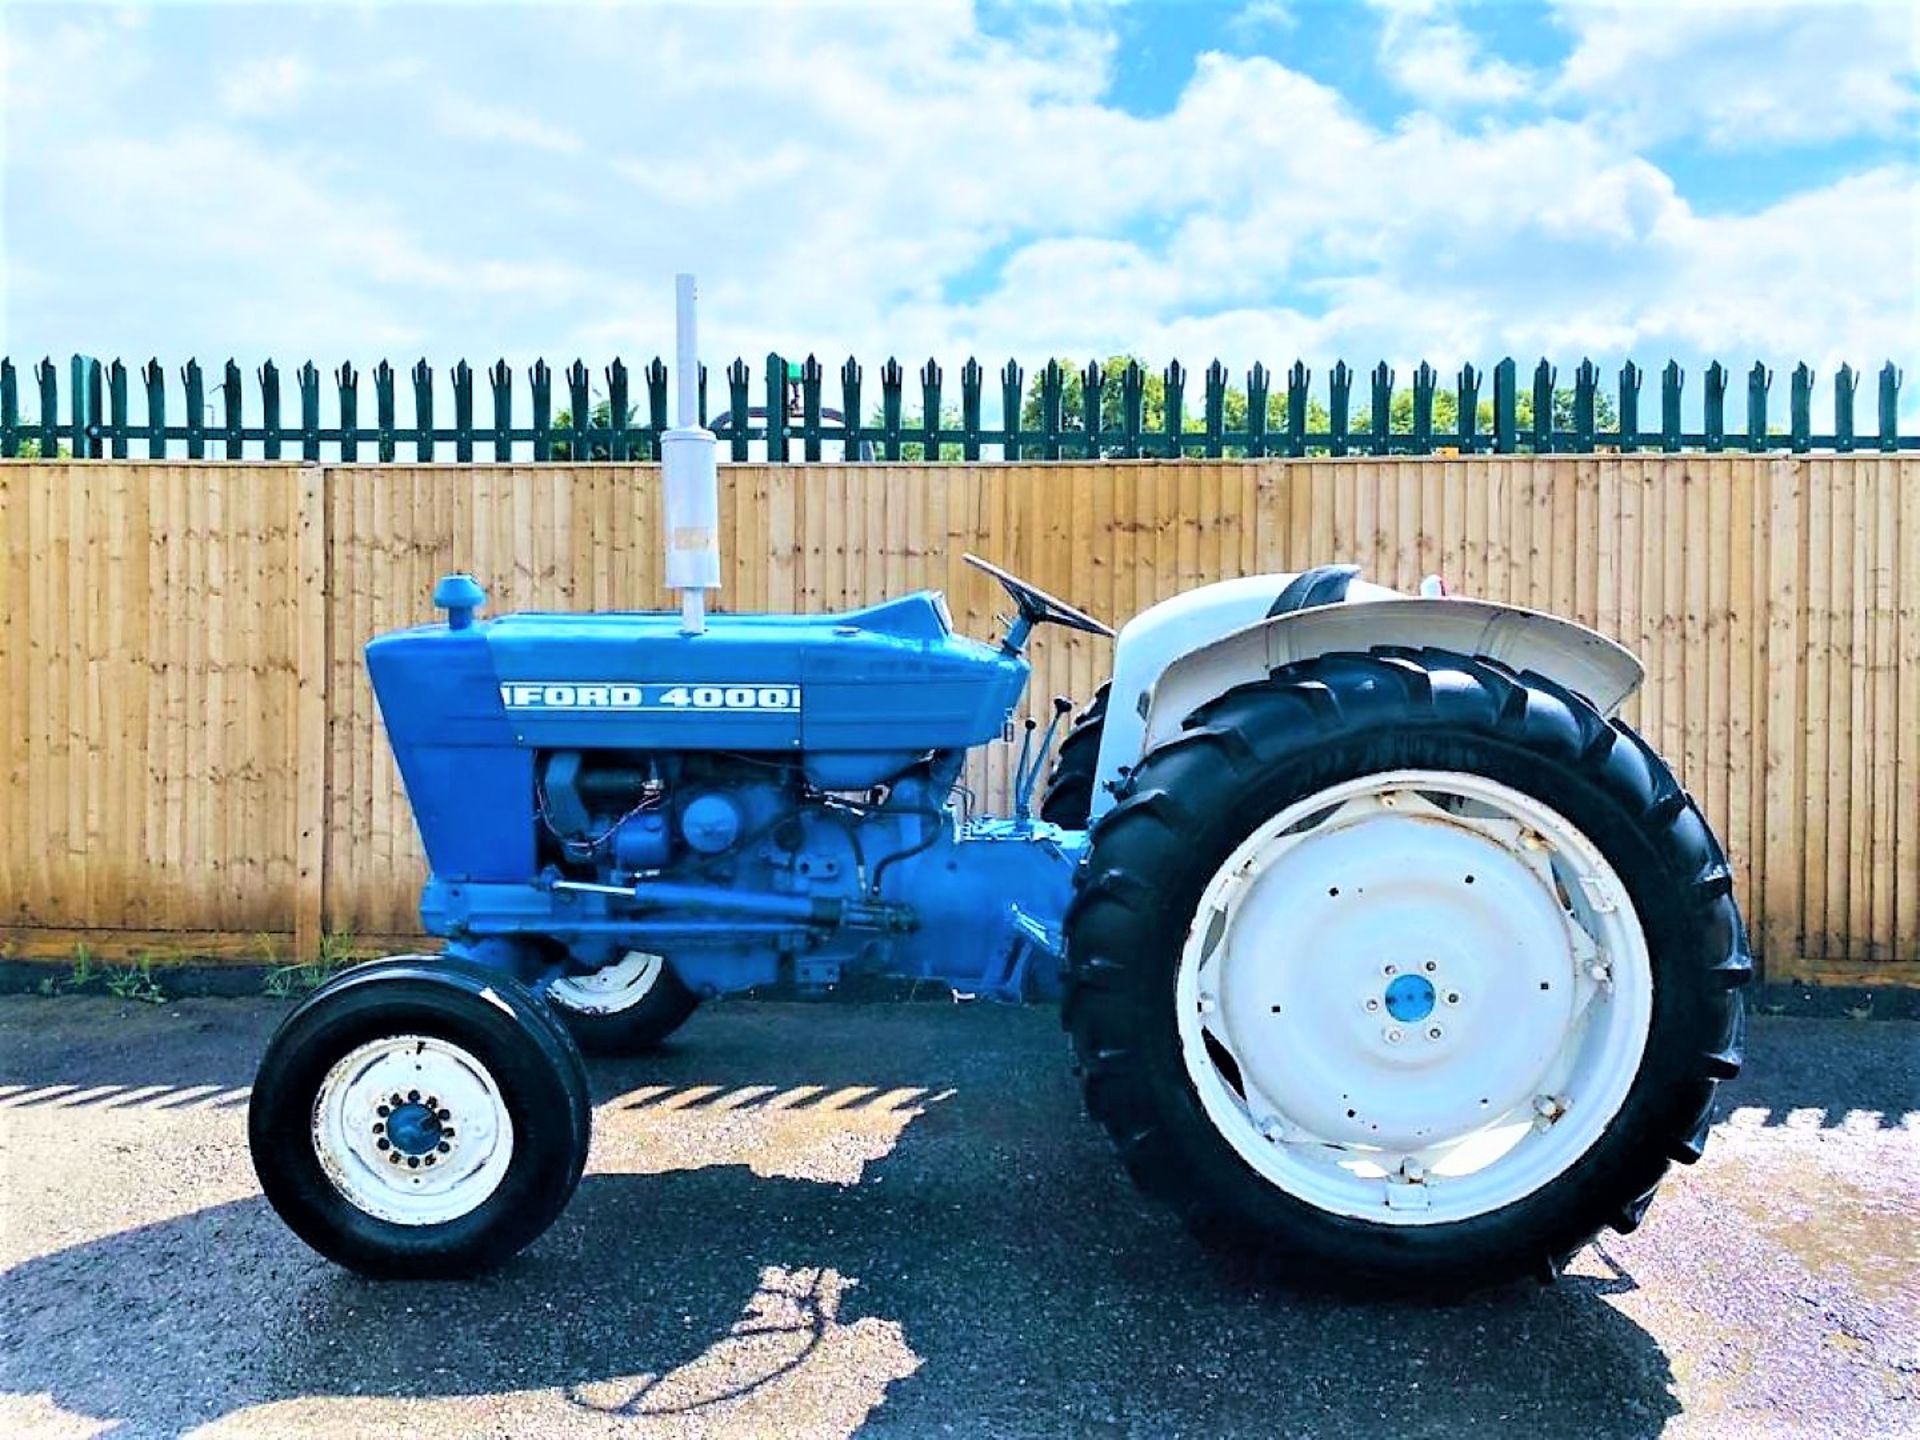 1969, FORD 4000 TRACTOR - Image 2 of 19